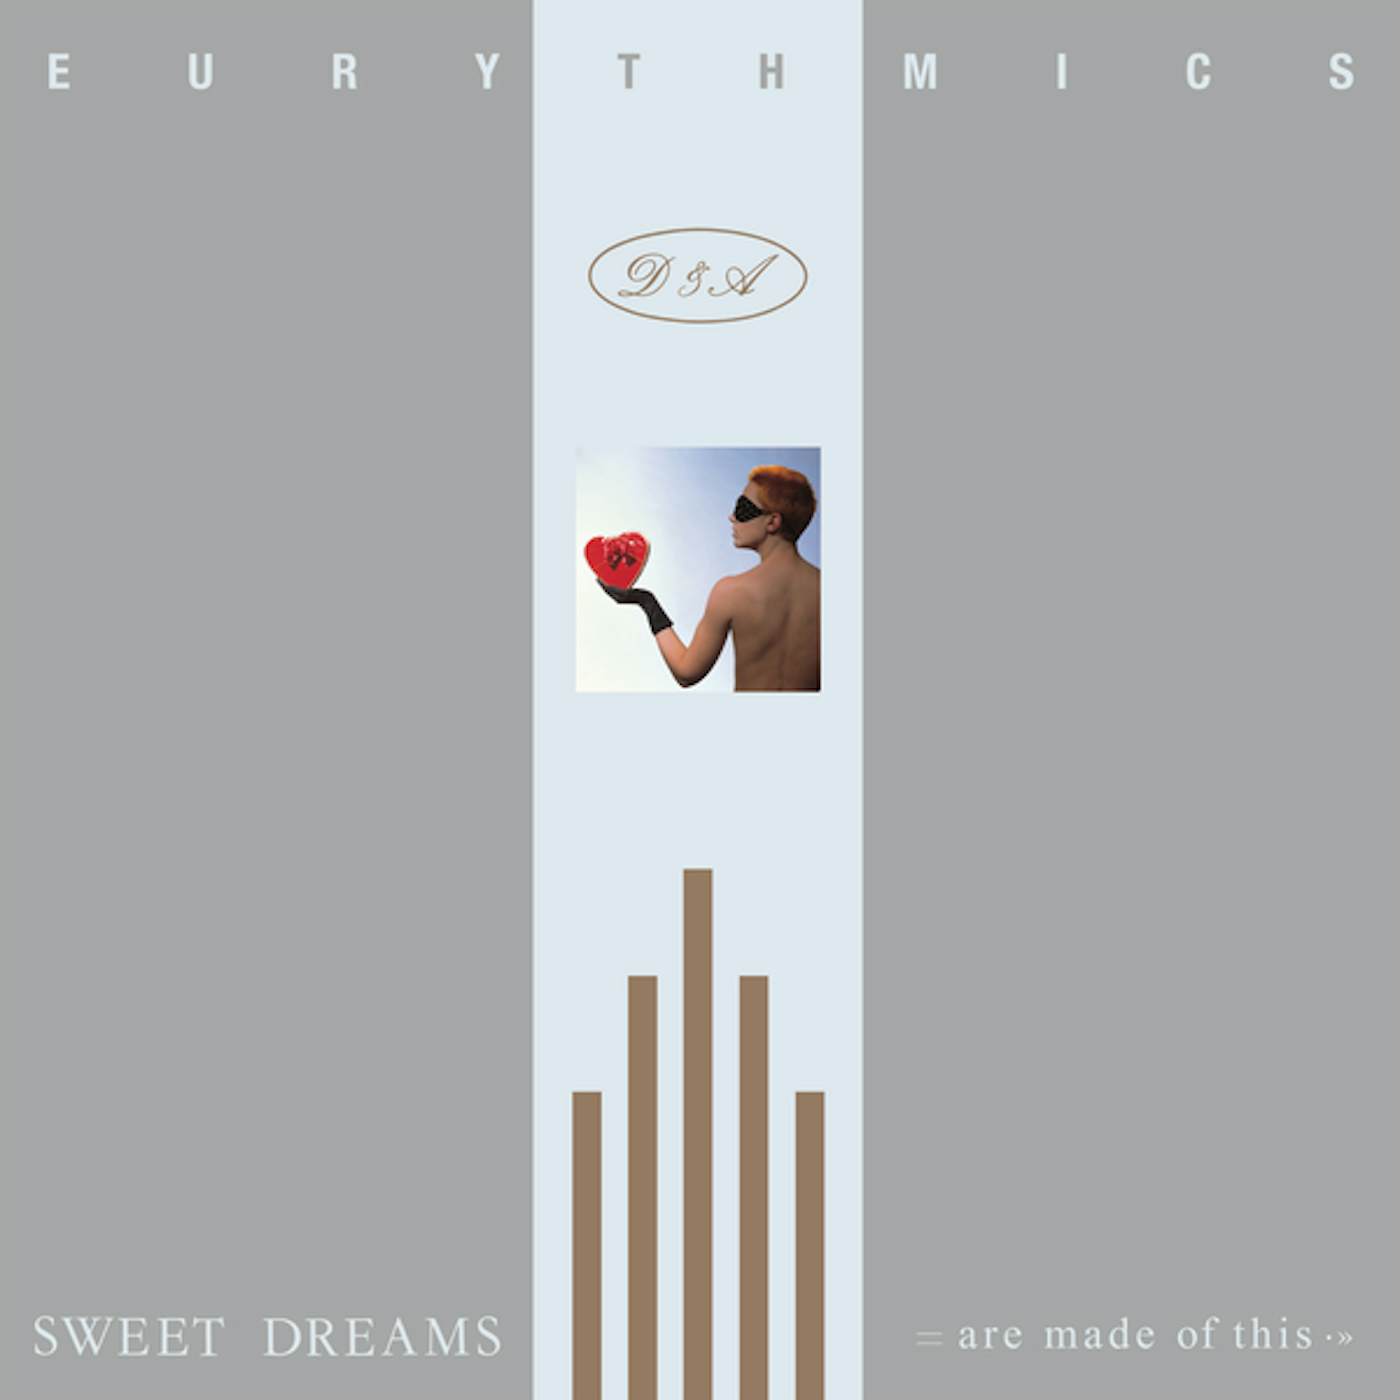 Eurythmics SWEET DREAMS (ARE MADE OF THIS) (180G/DL CARD) Vinyl Record